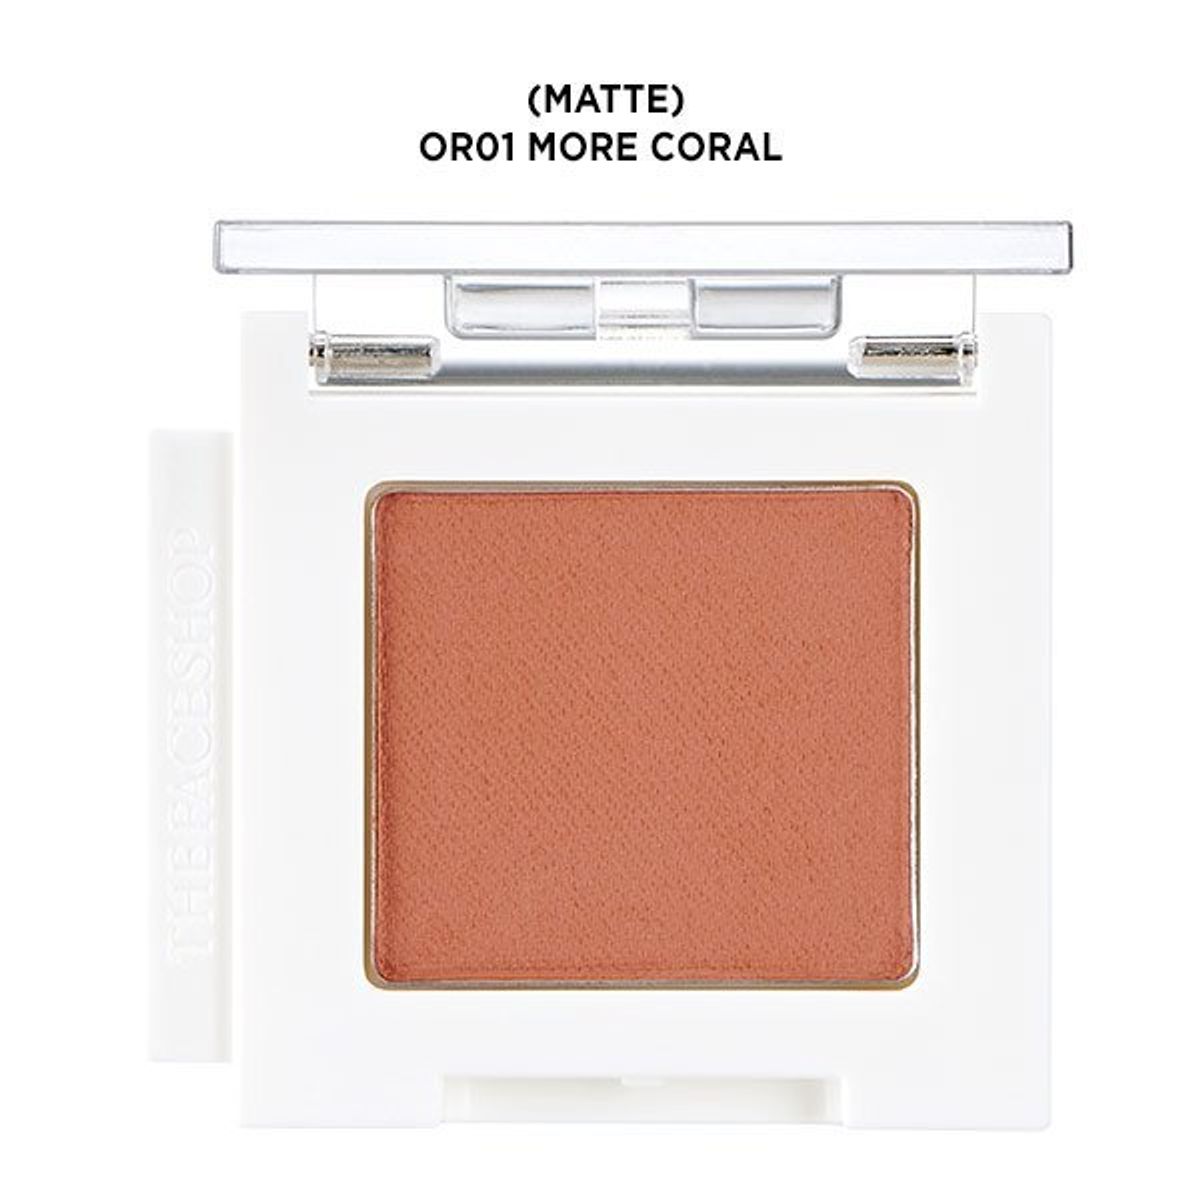 mono-cube-eyeshadow-matte-or01-more-coral-1